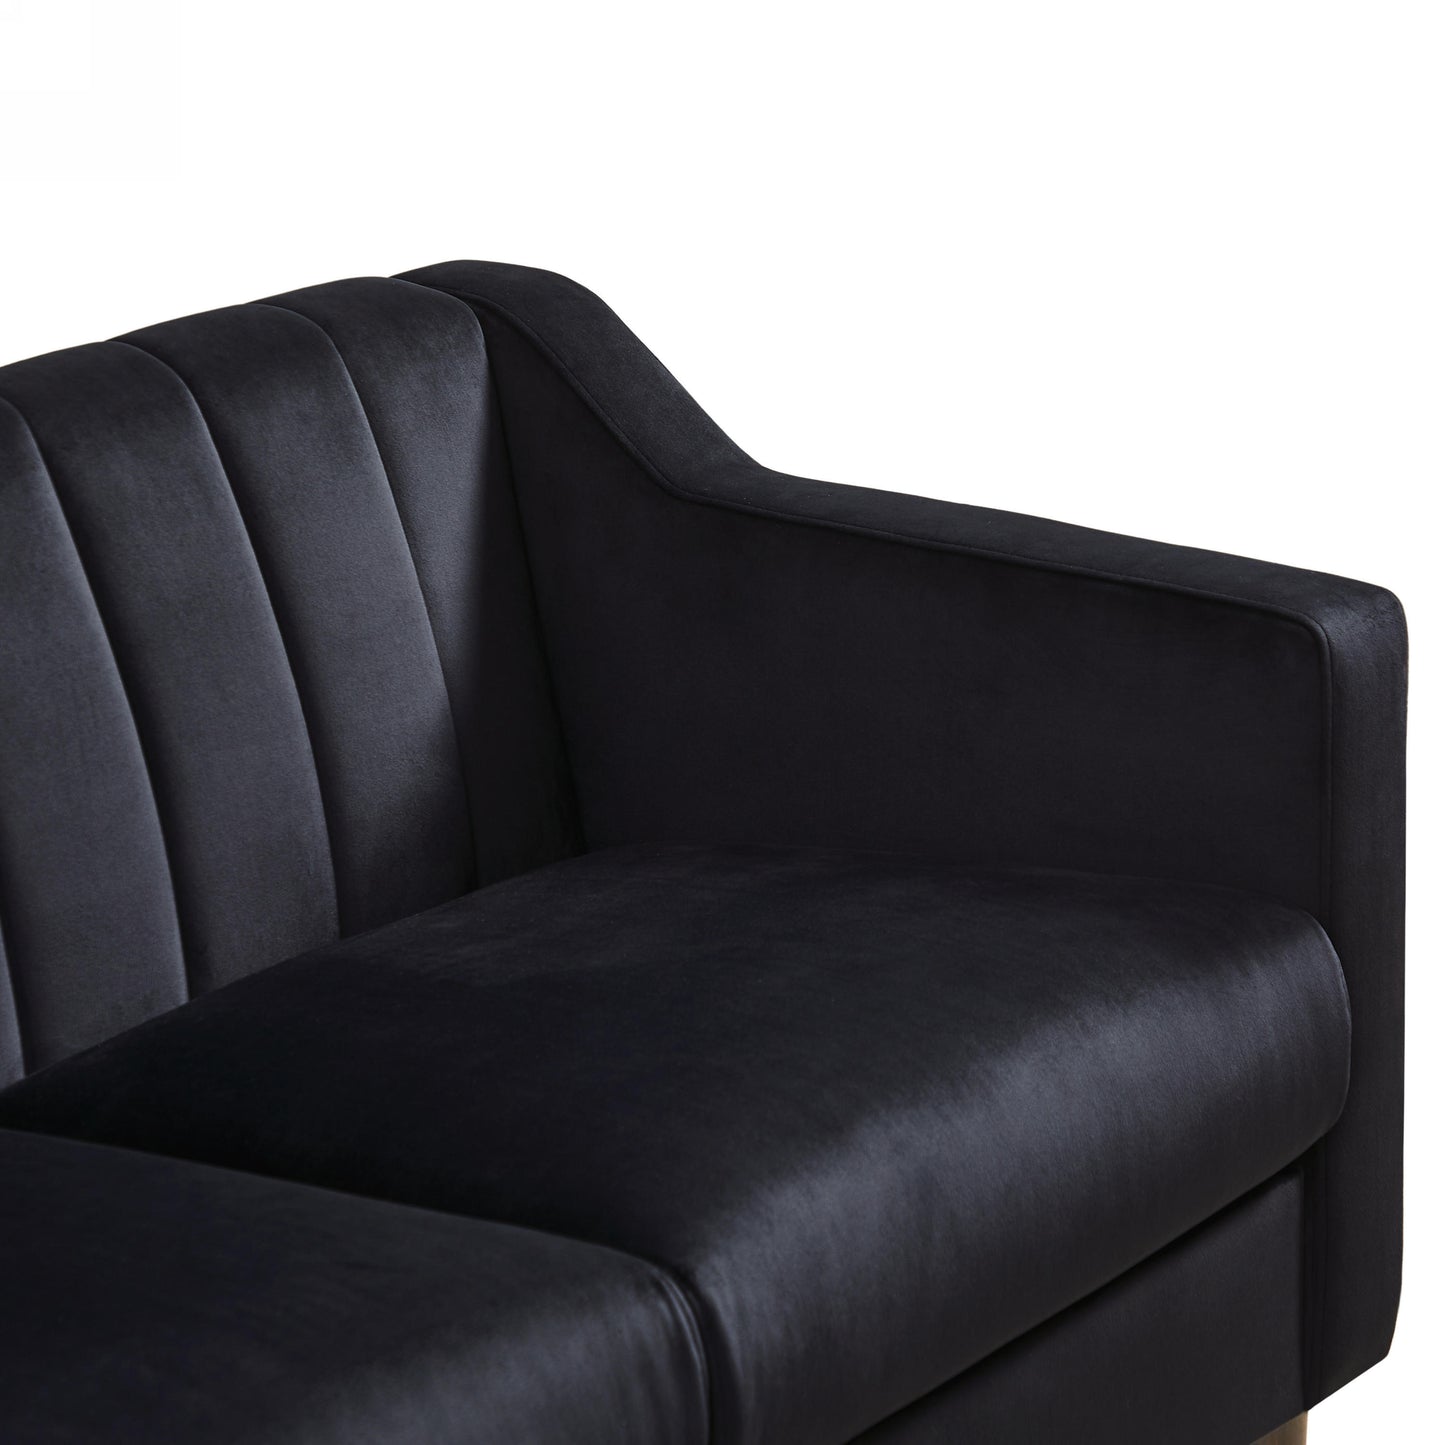 Modern Chesterfield sofa couch, Comfortable Upholstered sofa with Velvet Fabric and Wooden Frame and Wood Legs for Living Room/Bedroom/Office Black --3 Seats